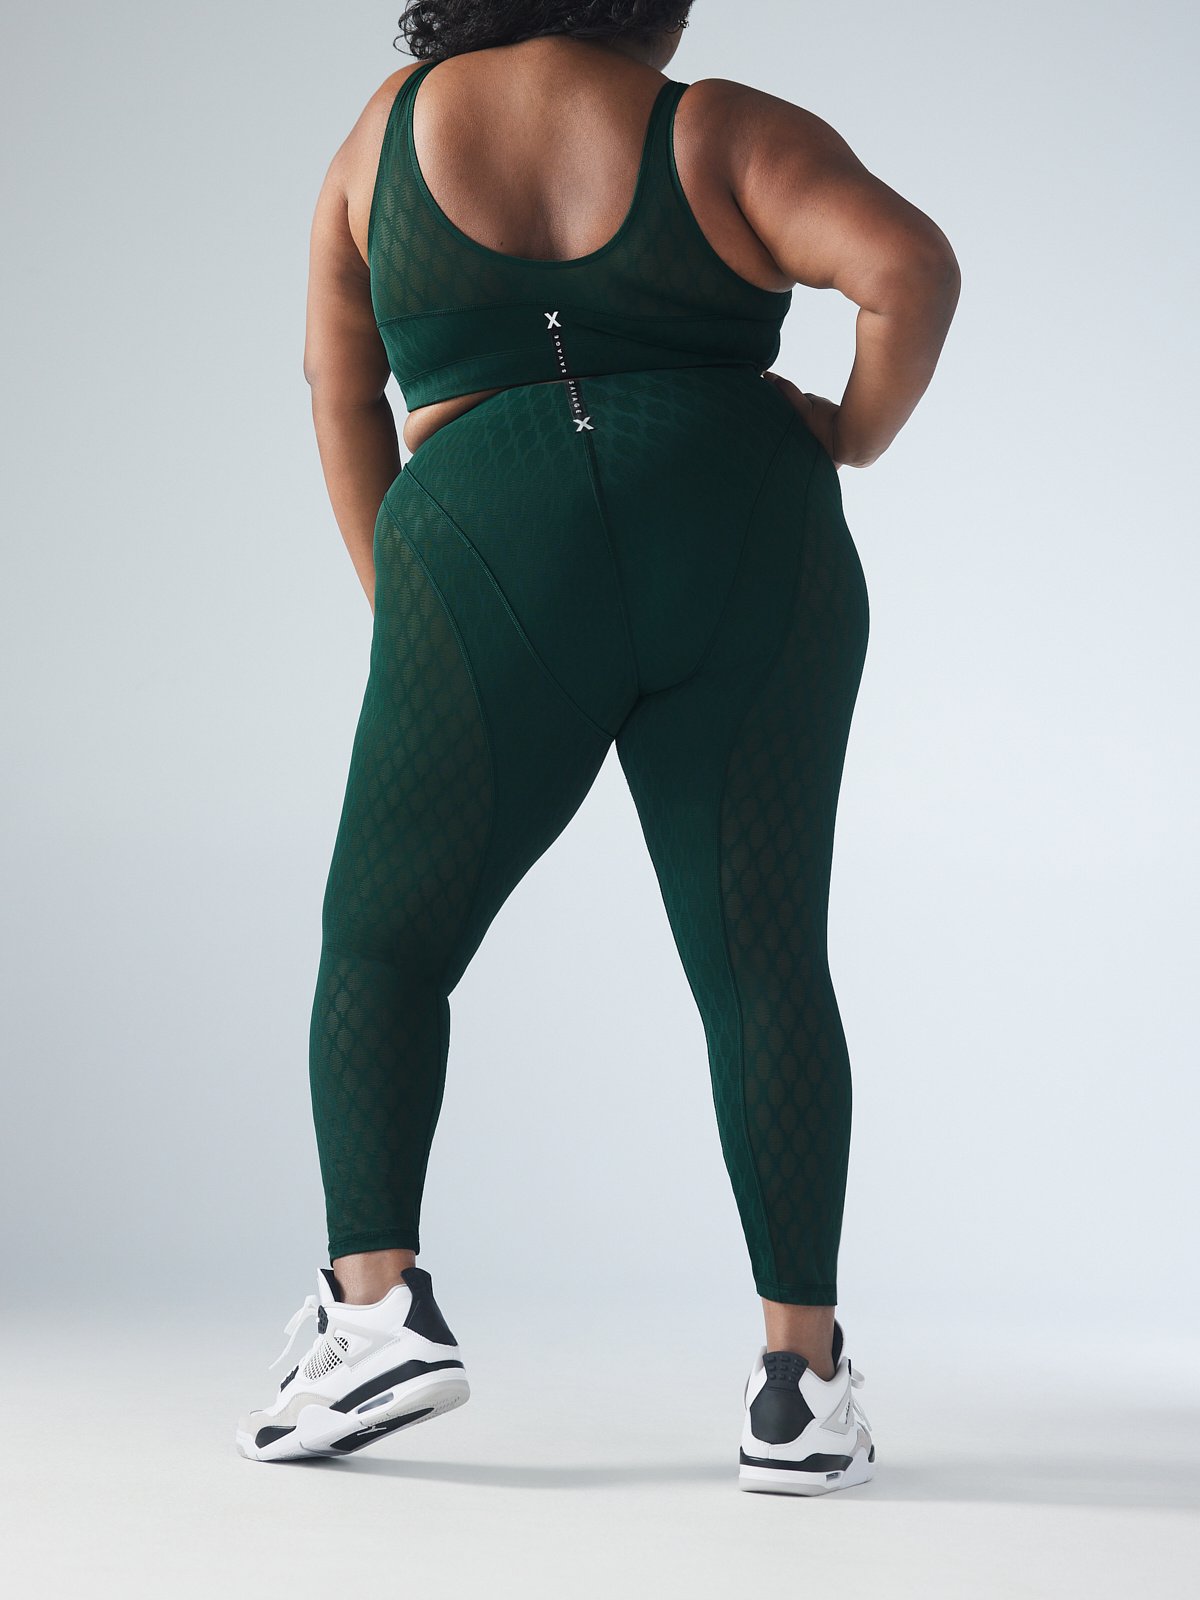 Are the Savage x Fenty leggings THE perfect legging? // greens are @bl, Savage X Fenty